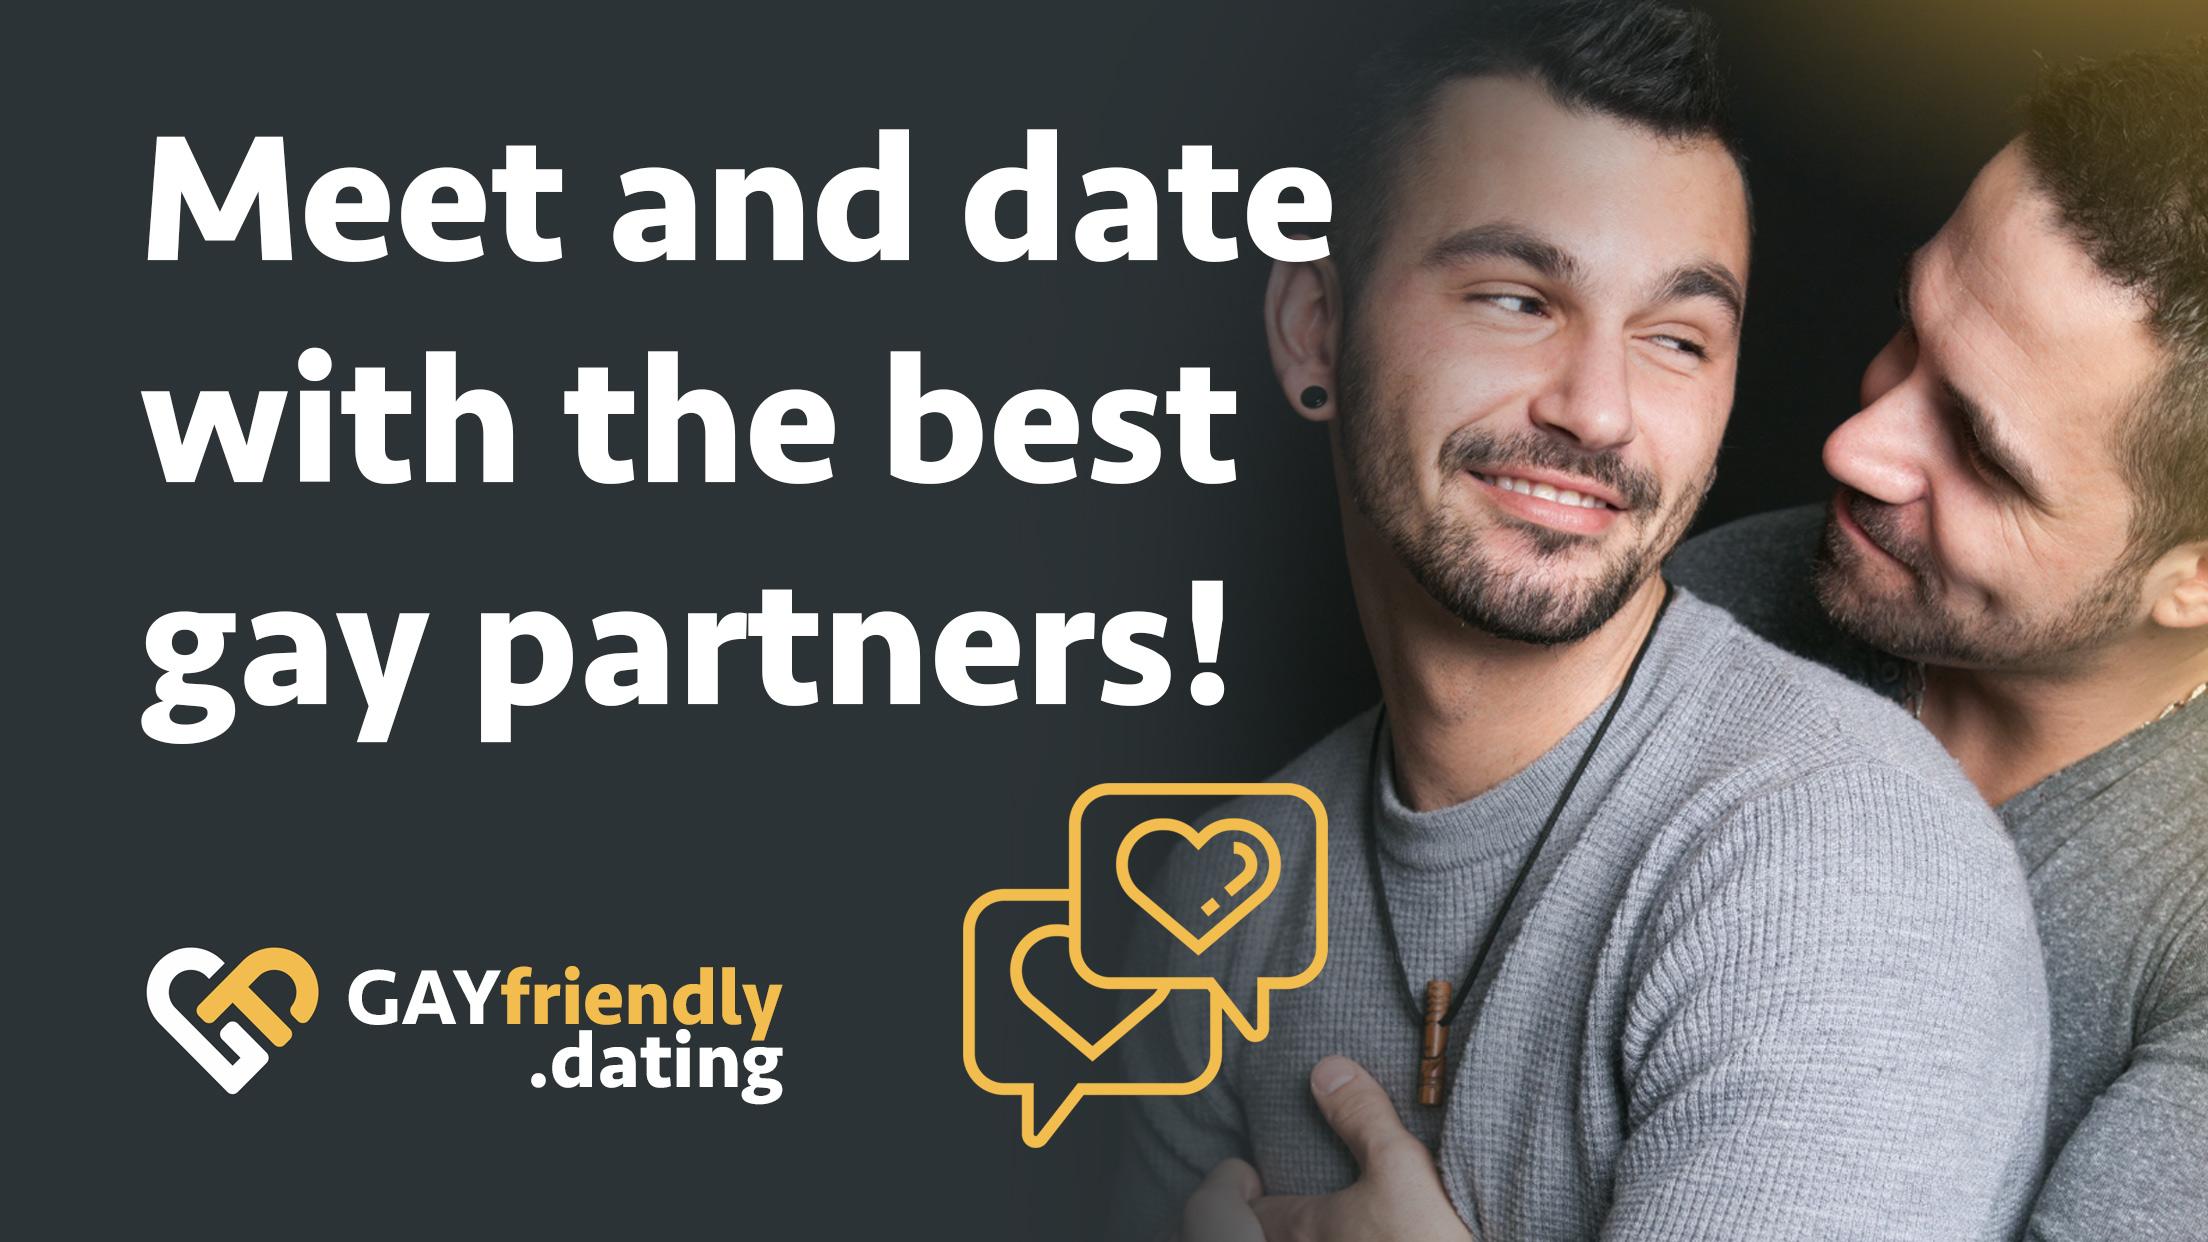 Dating apps in Ibadan gay best The 14